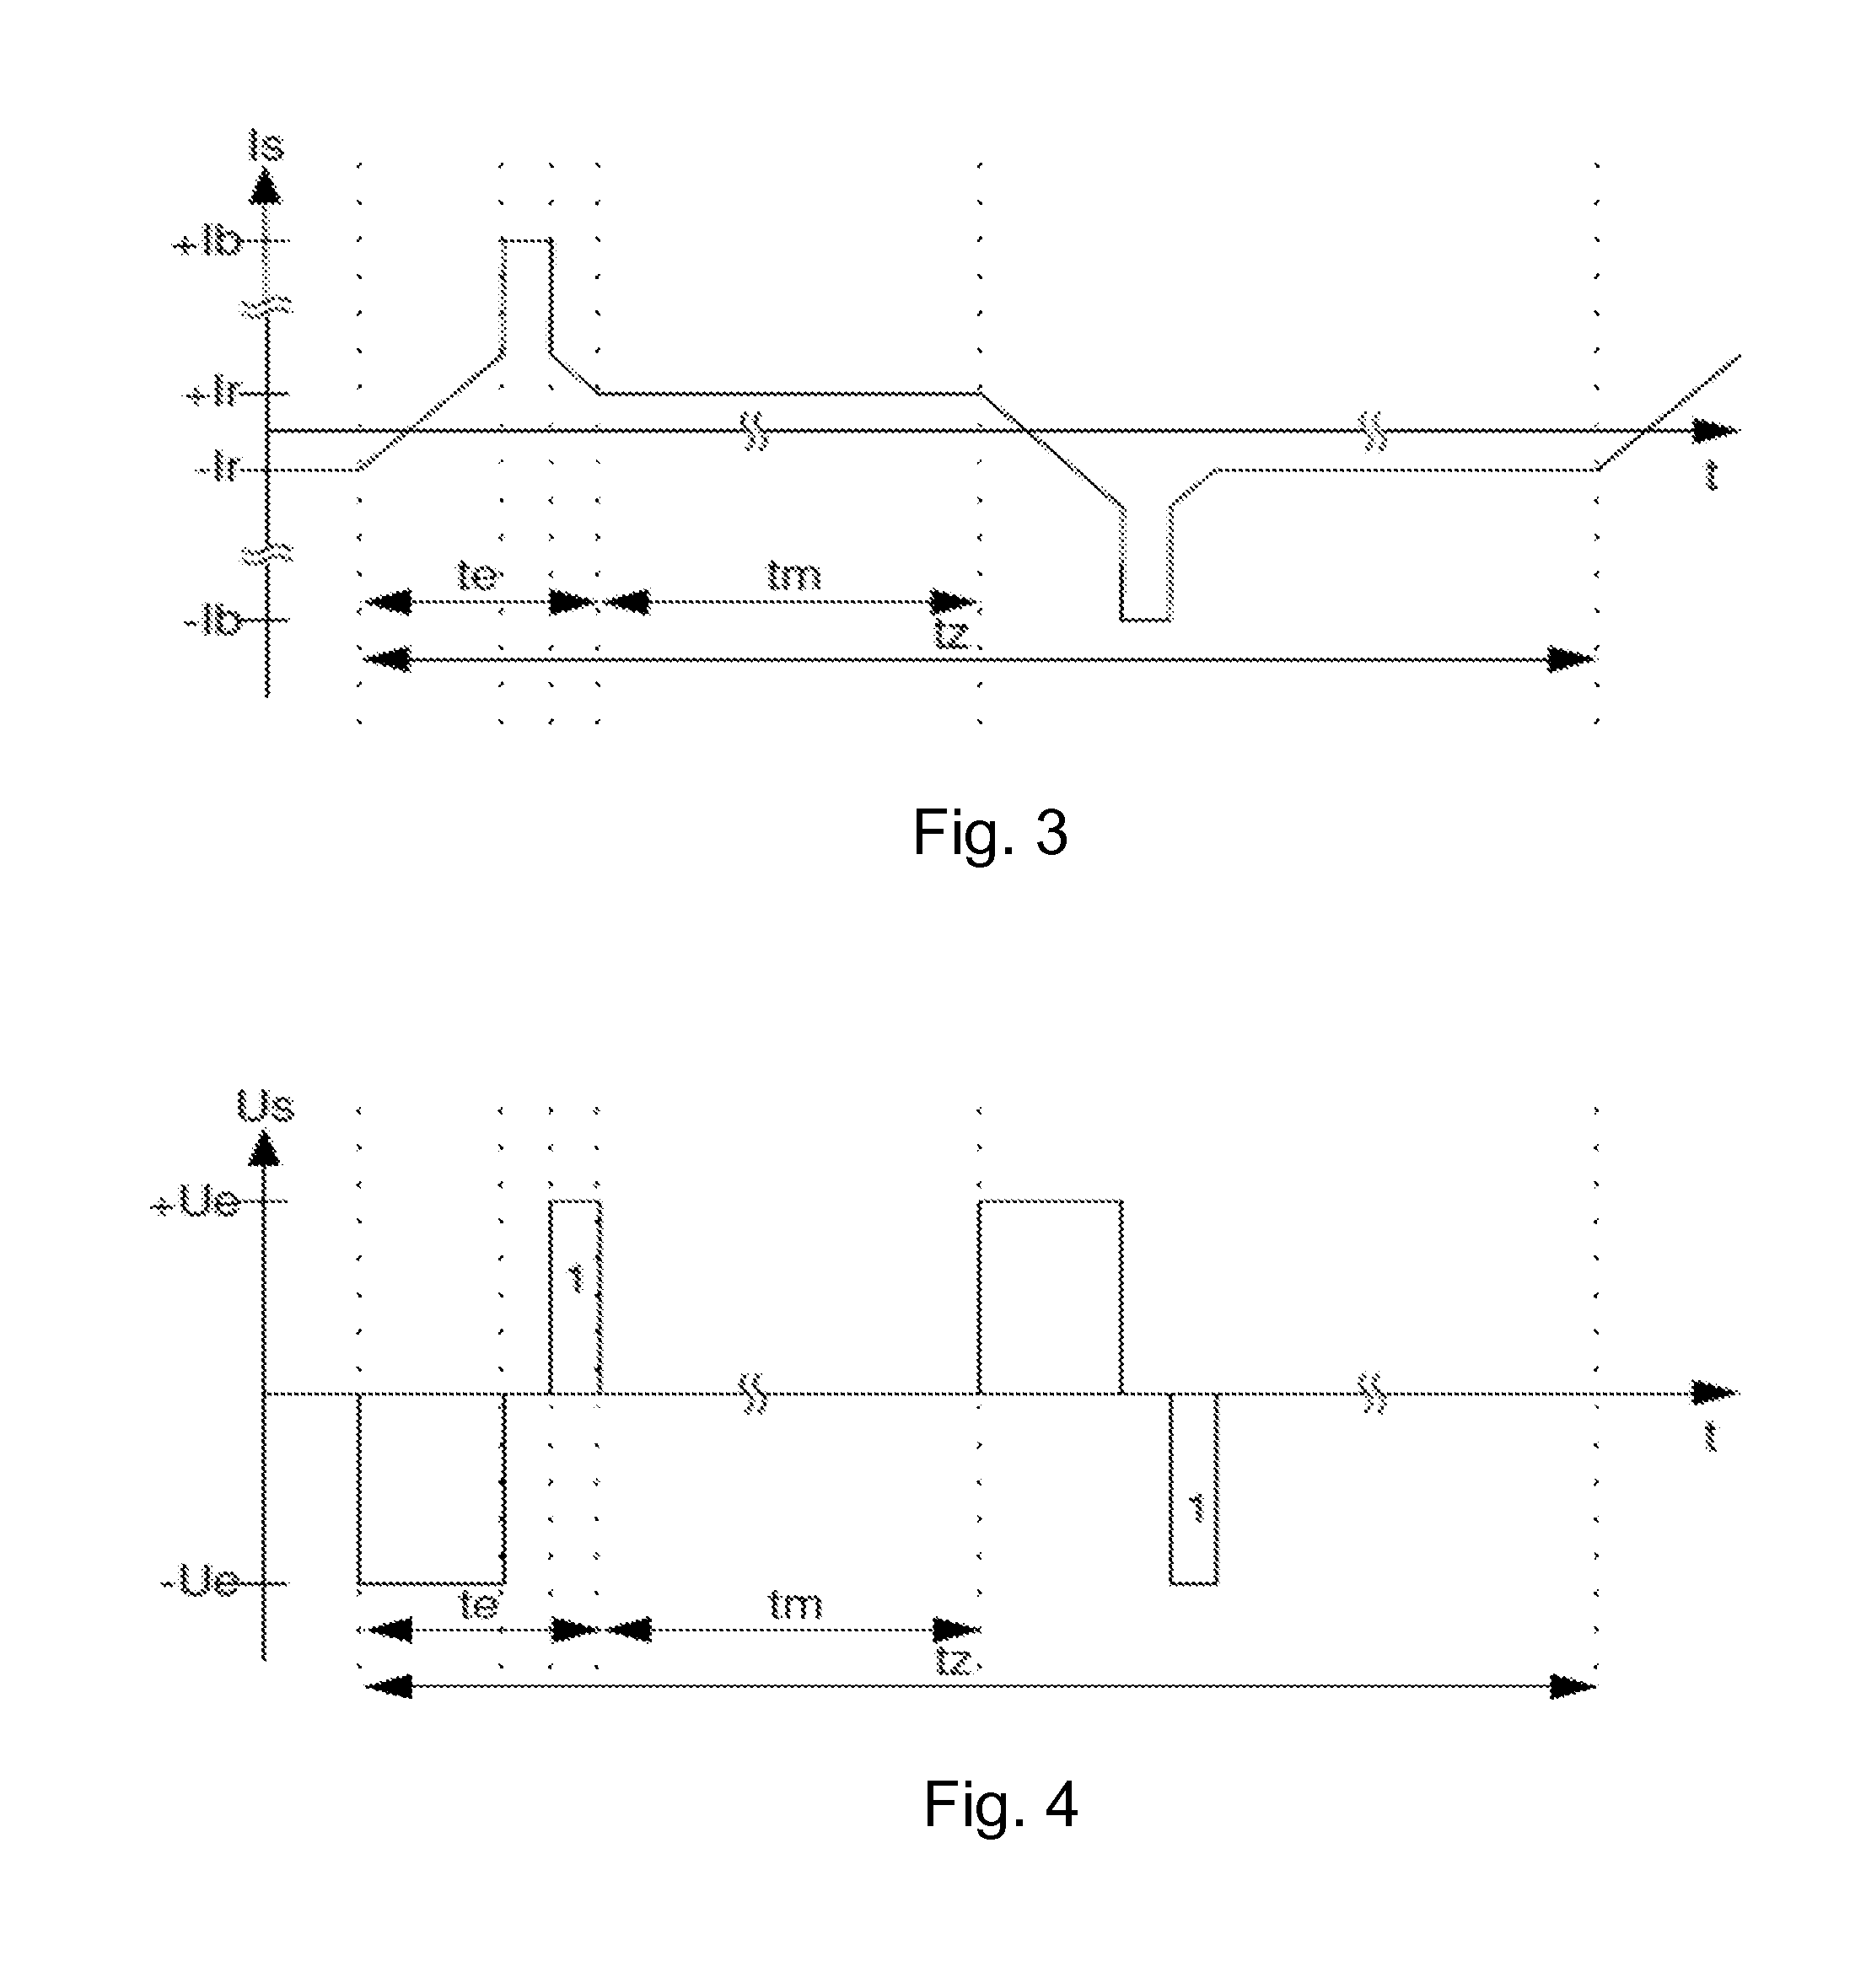 Method and Device for Measuring Electric Currents by Means of a Current Transformer